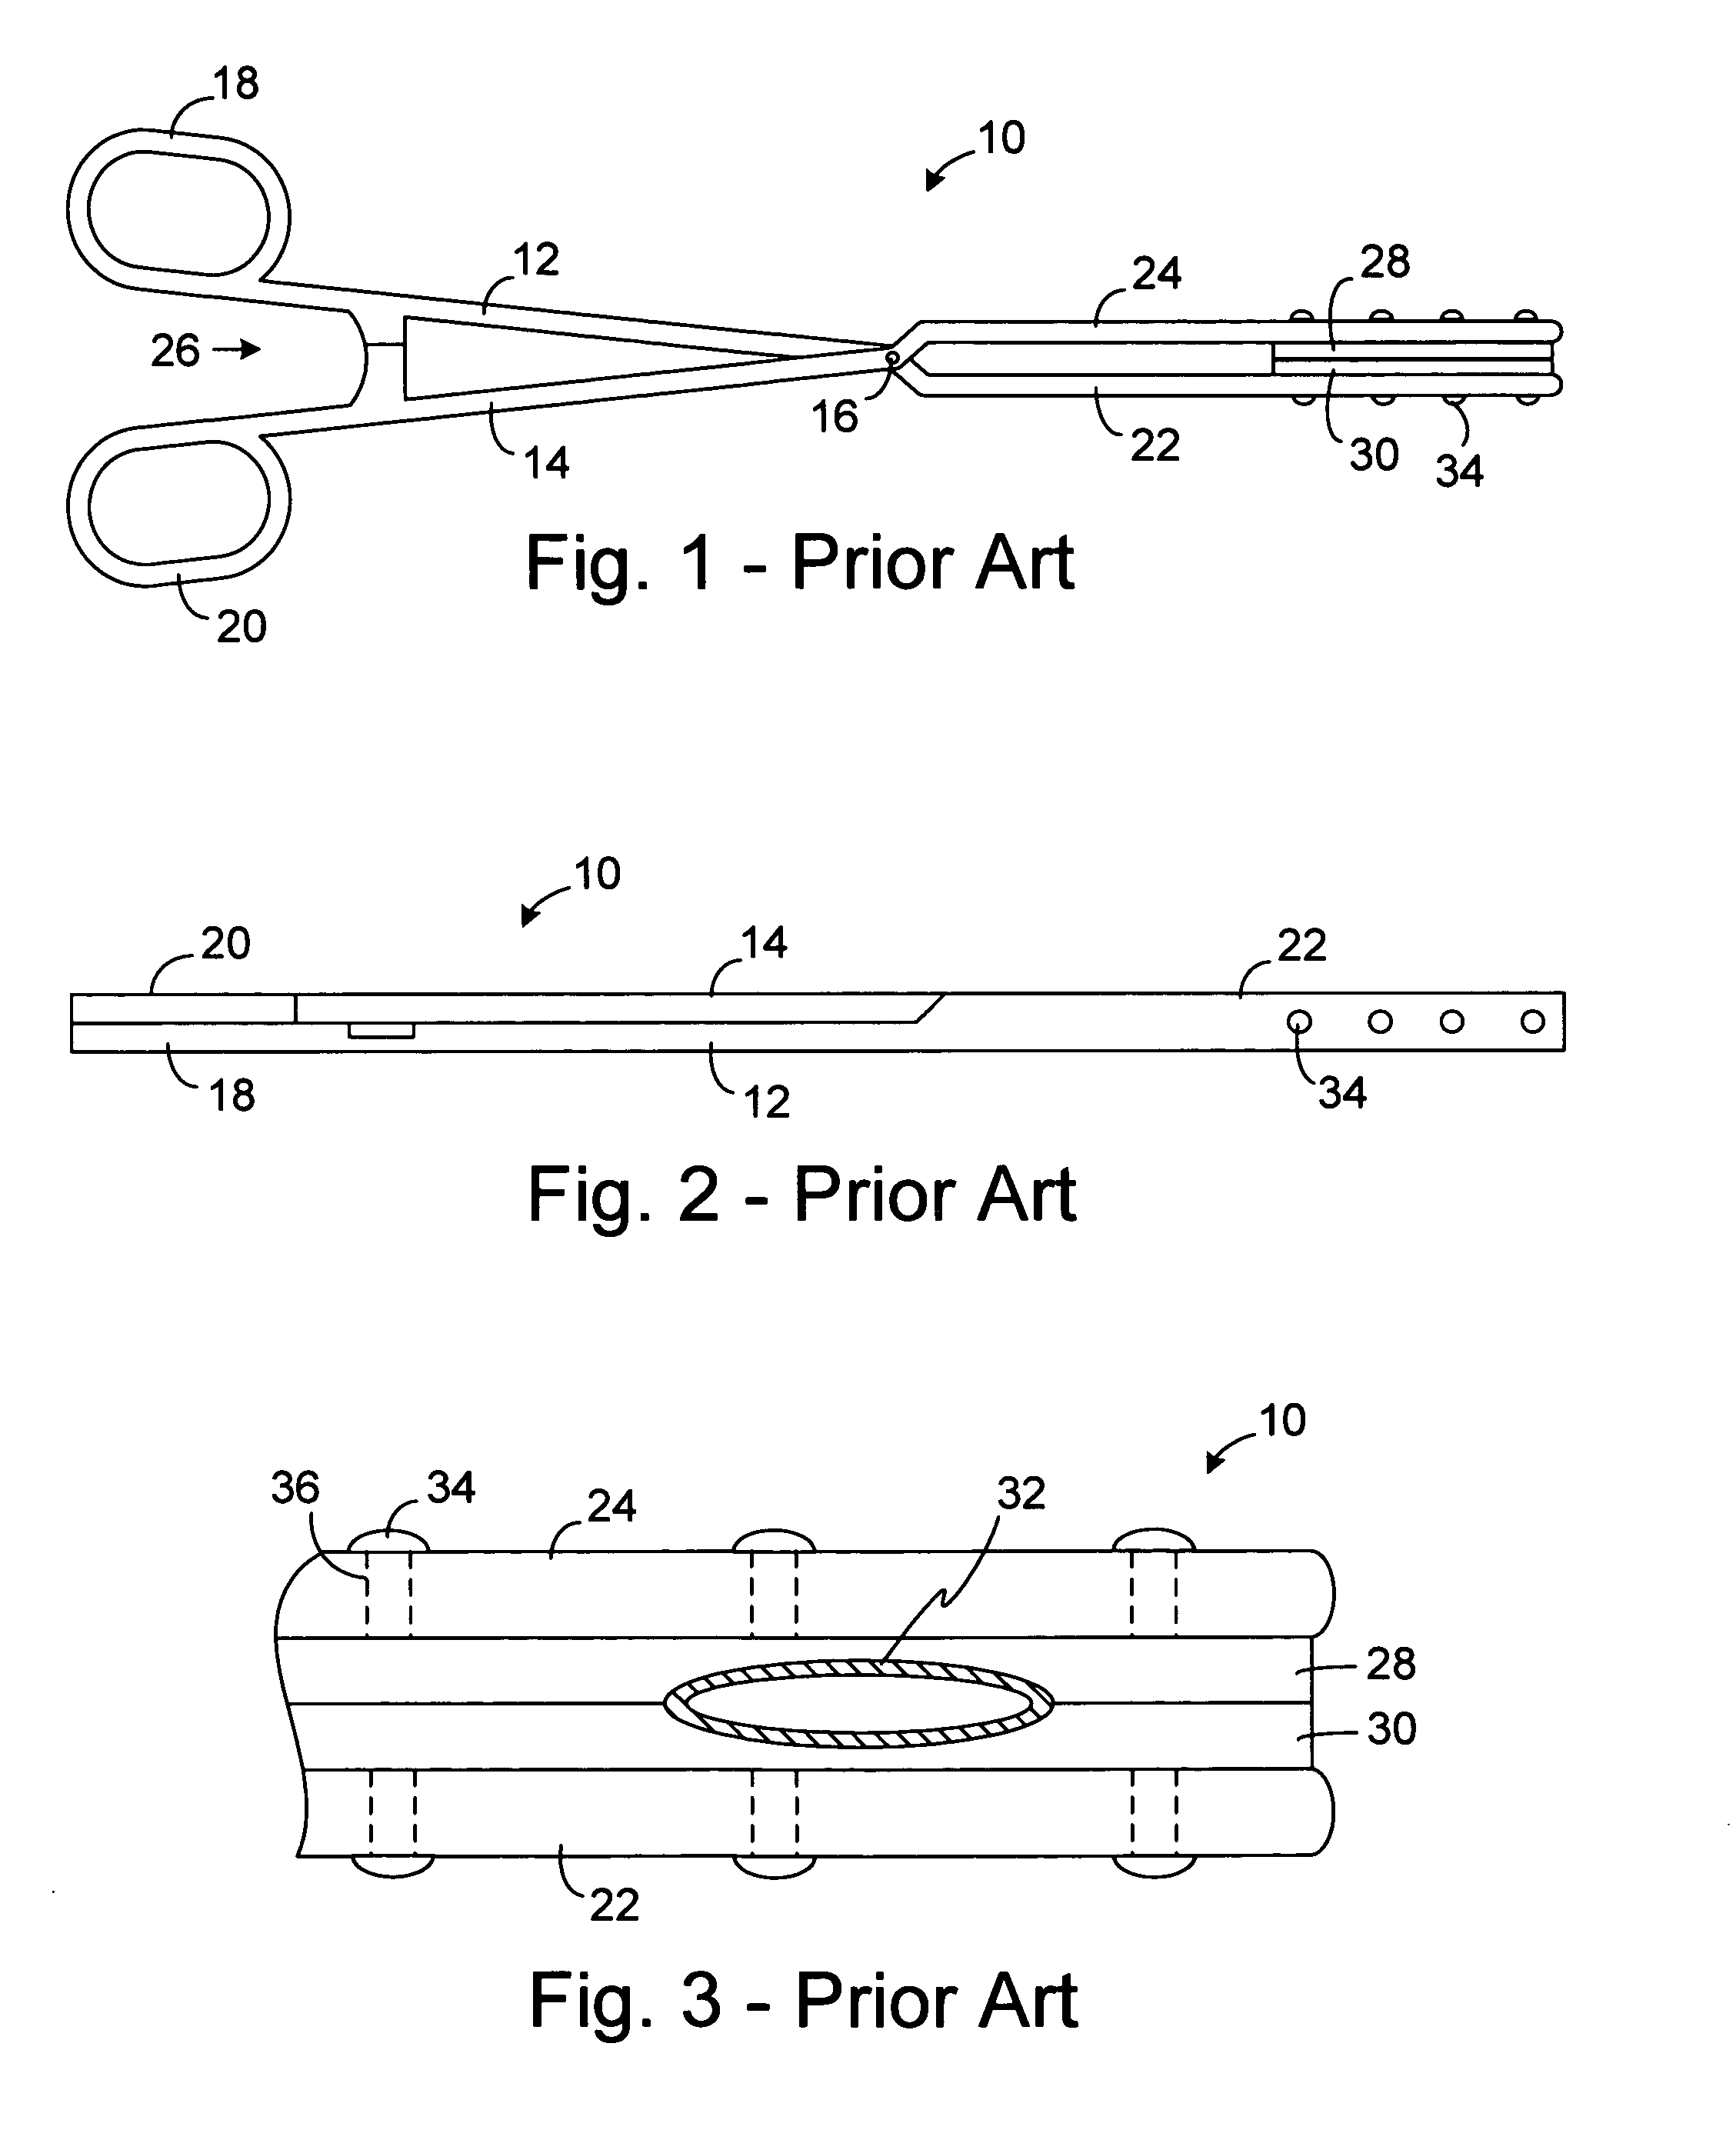 Apparatus for converting a clamp into an electrophysiology device